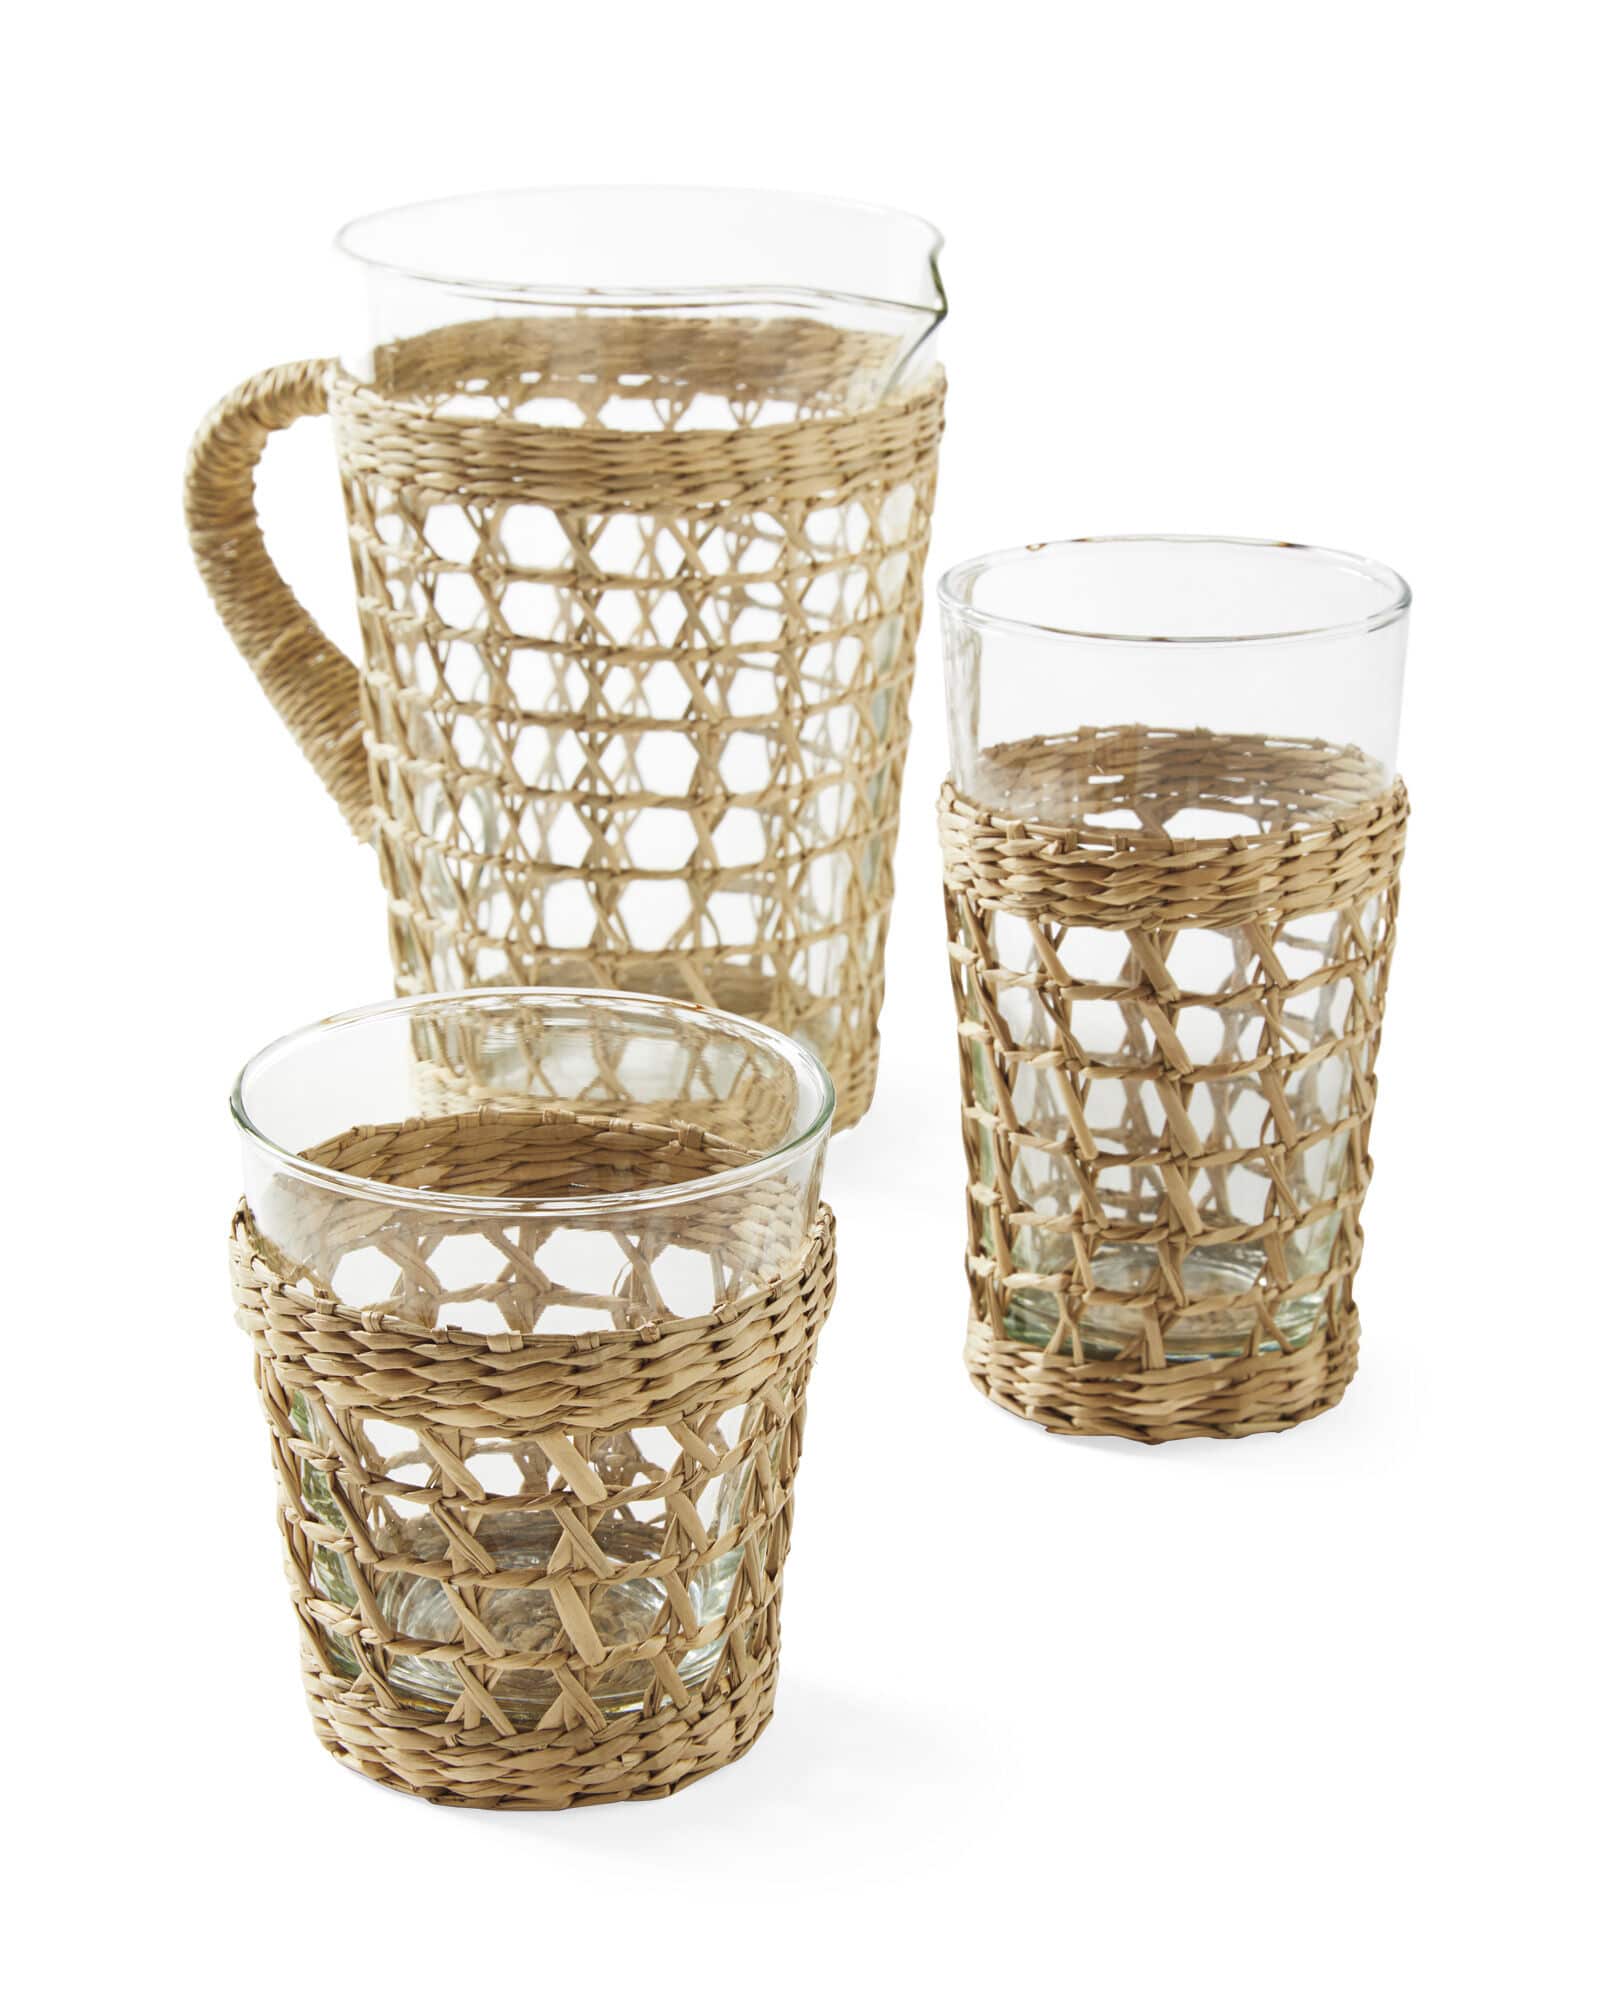 Cayman Seagrass pitcher and glasses - Serena & Lily - dining - outdoor dining - dining al fresco - effortlessly chic